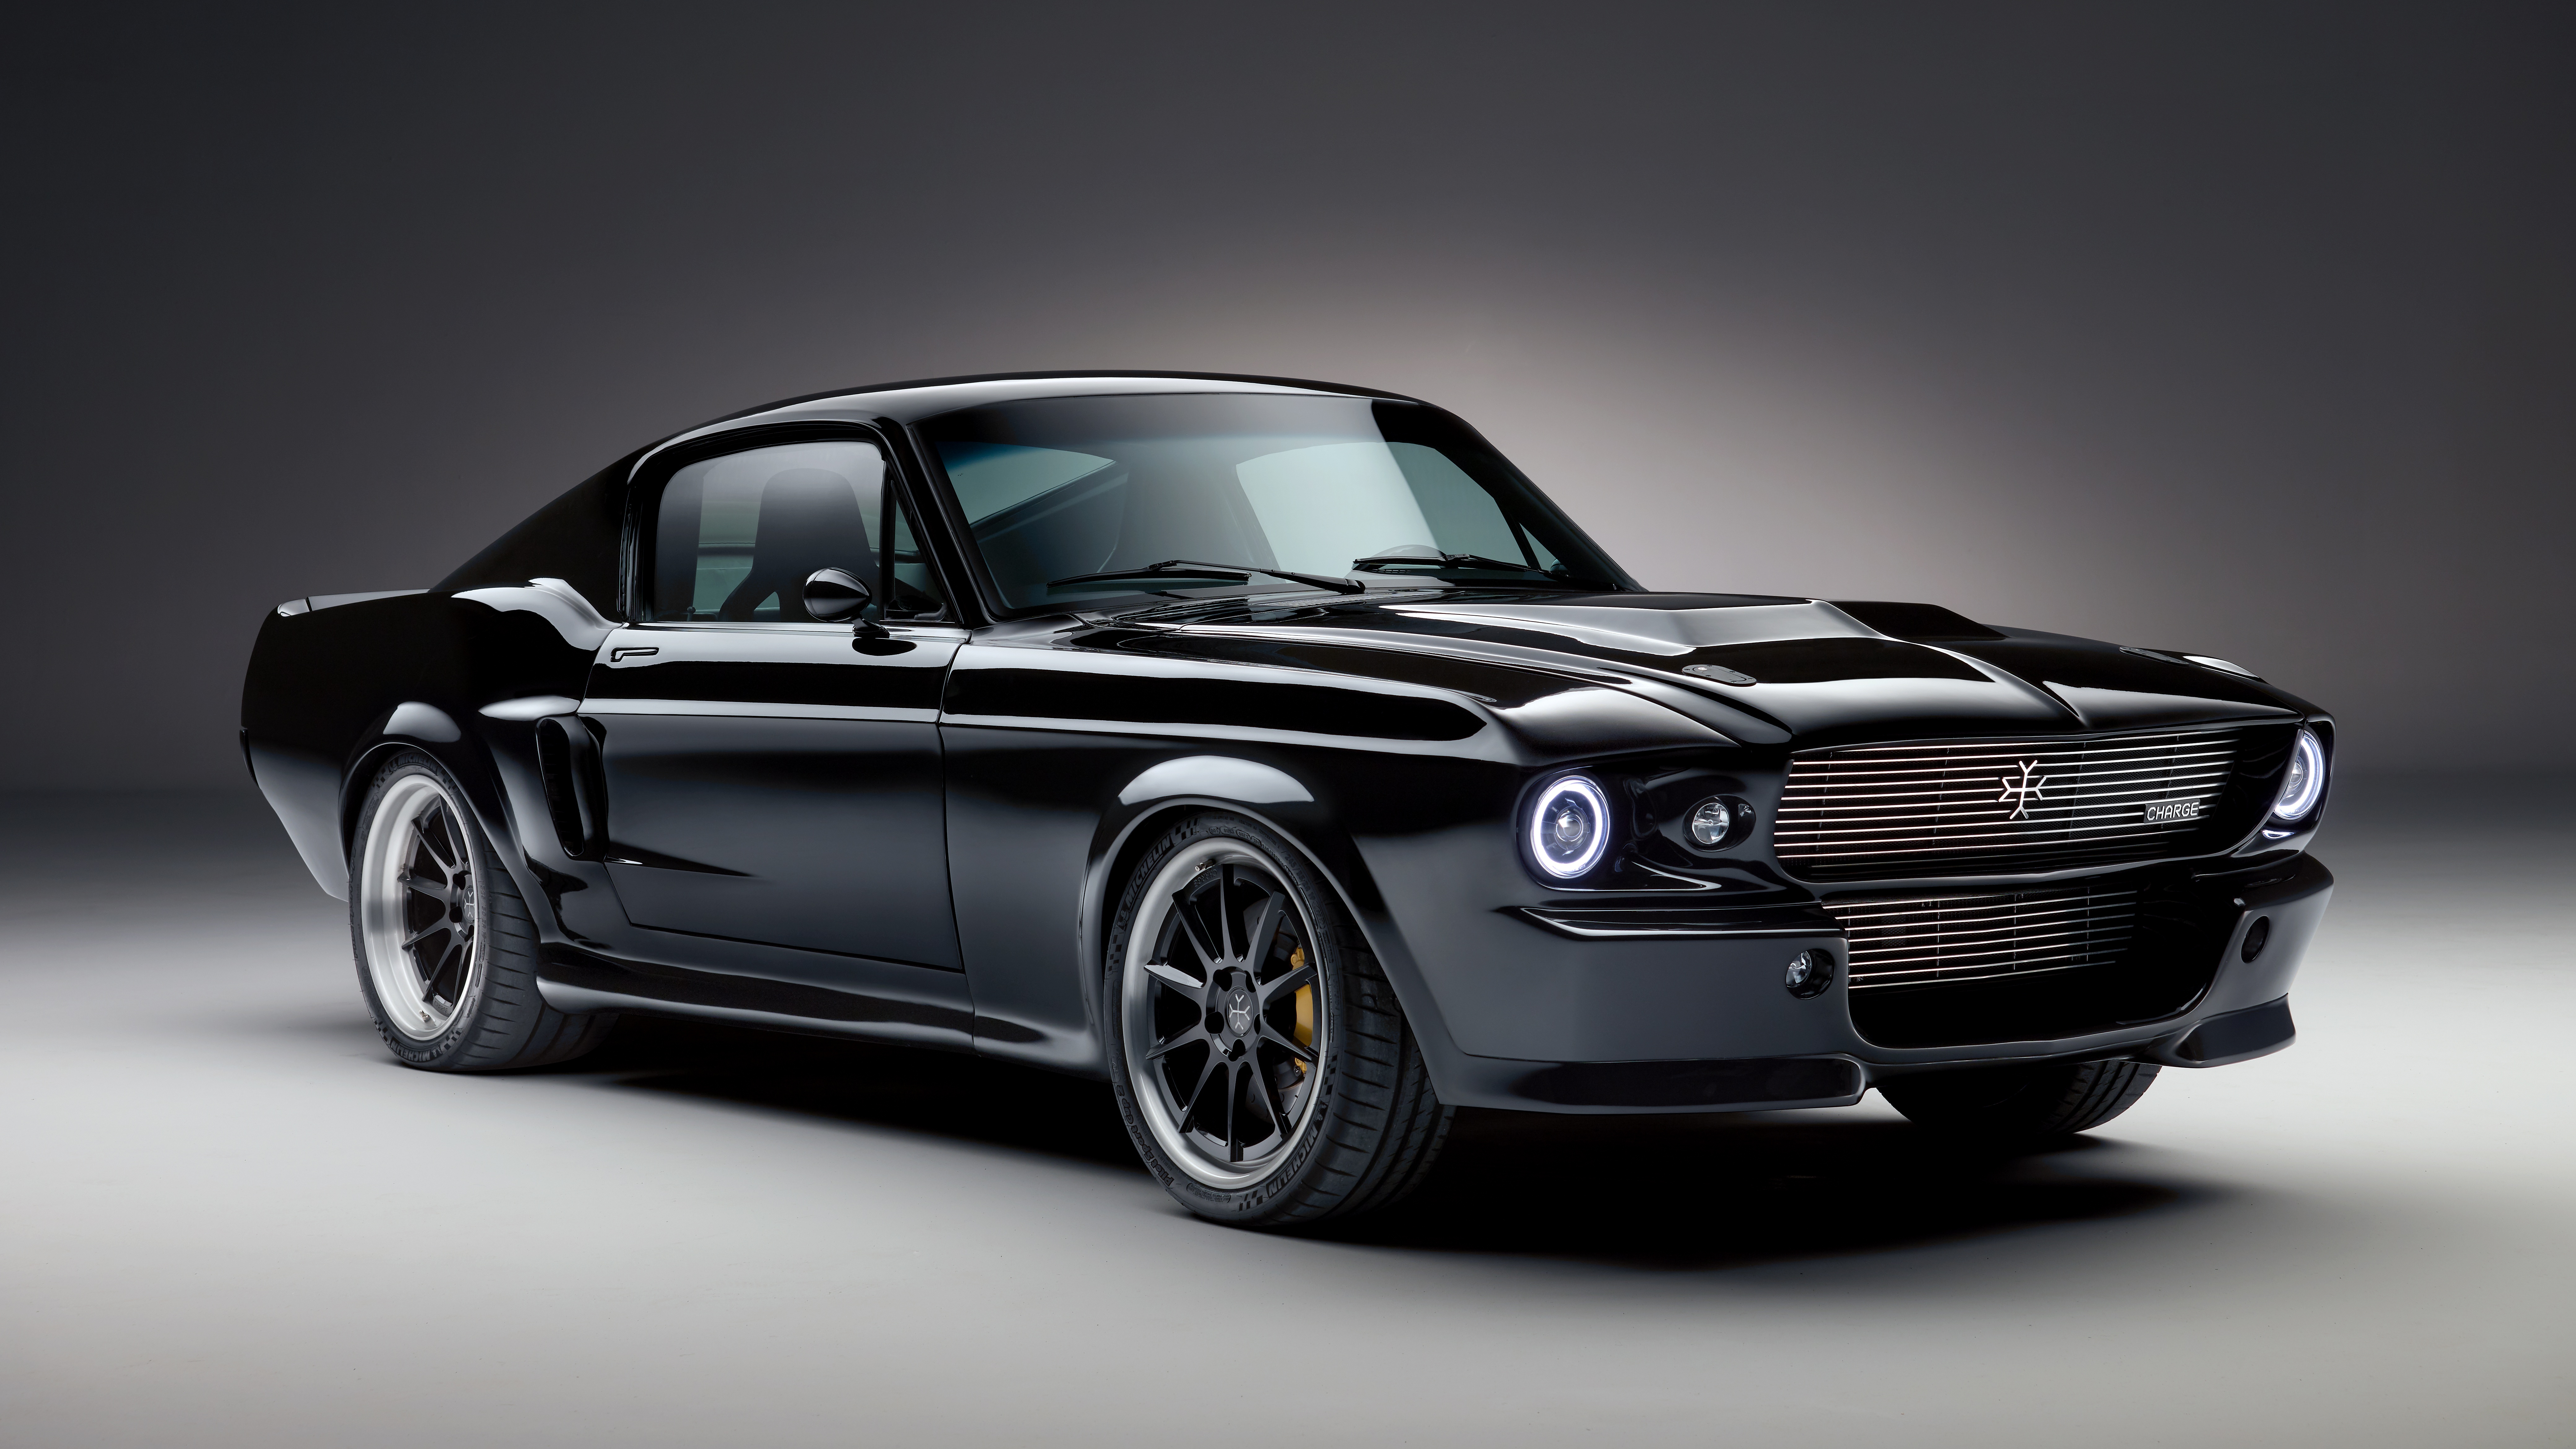 electric car, ford mustang, vehicles, black car, car, ford, muscle car